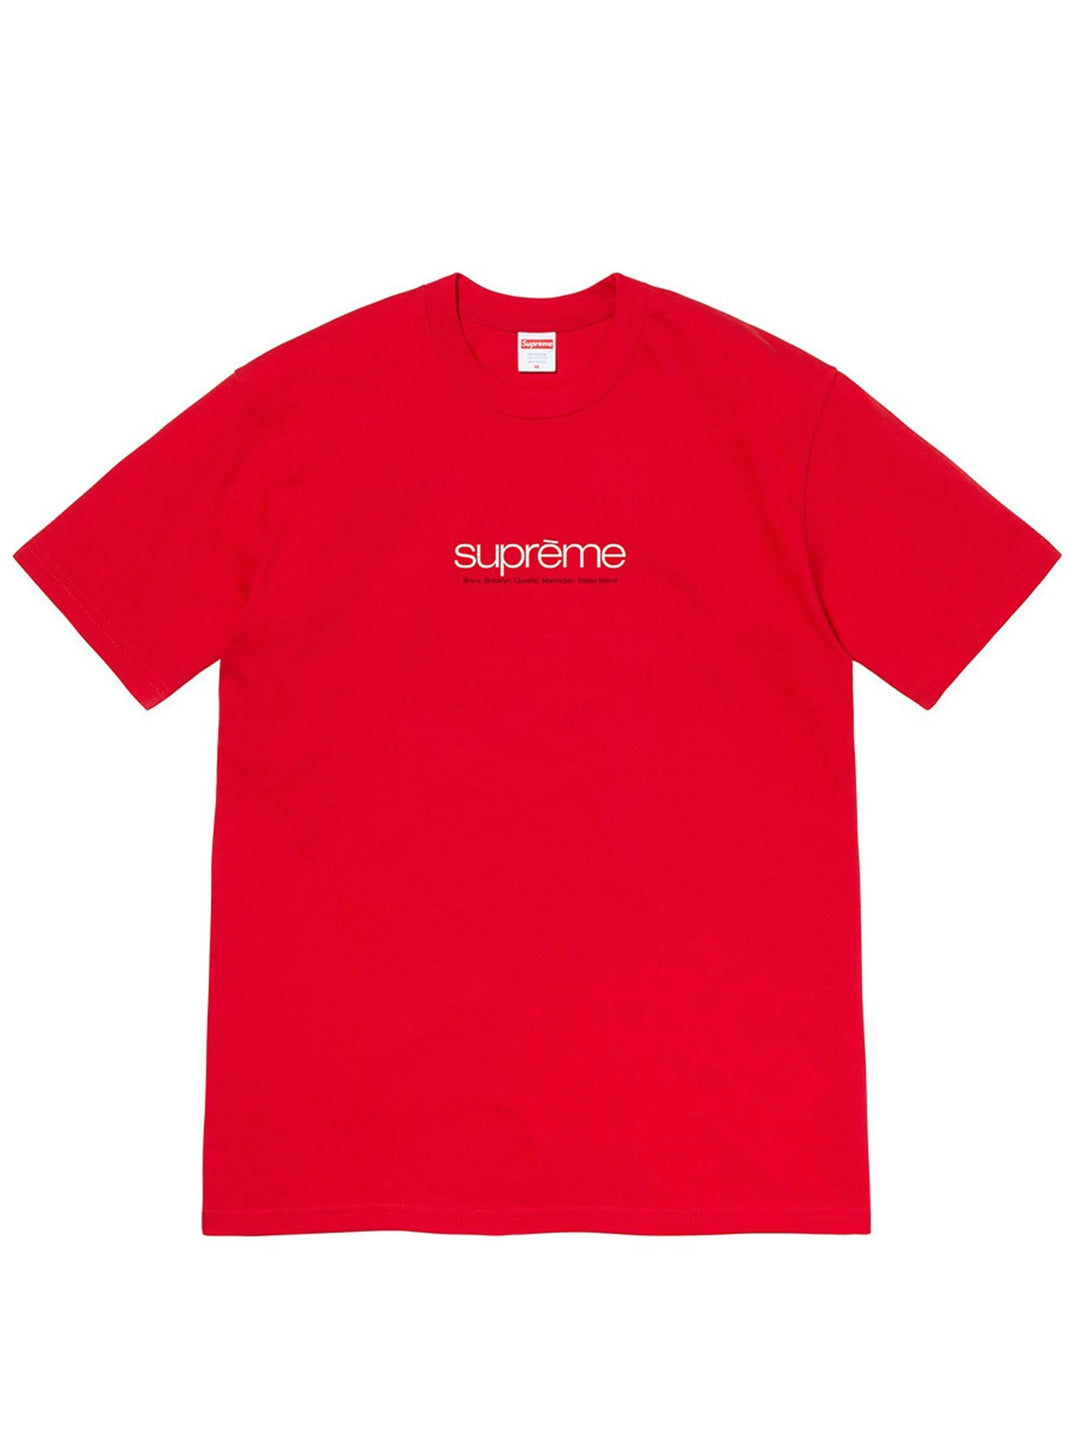 Supreme Five Boroughs Tee Red [SS21] Prior